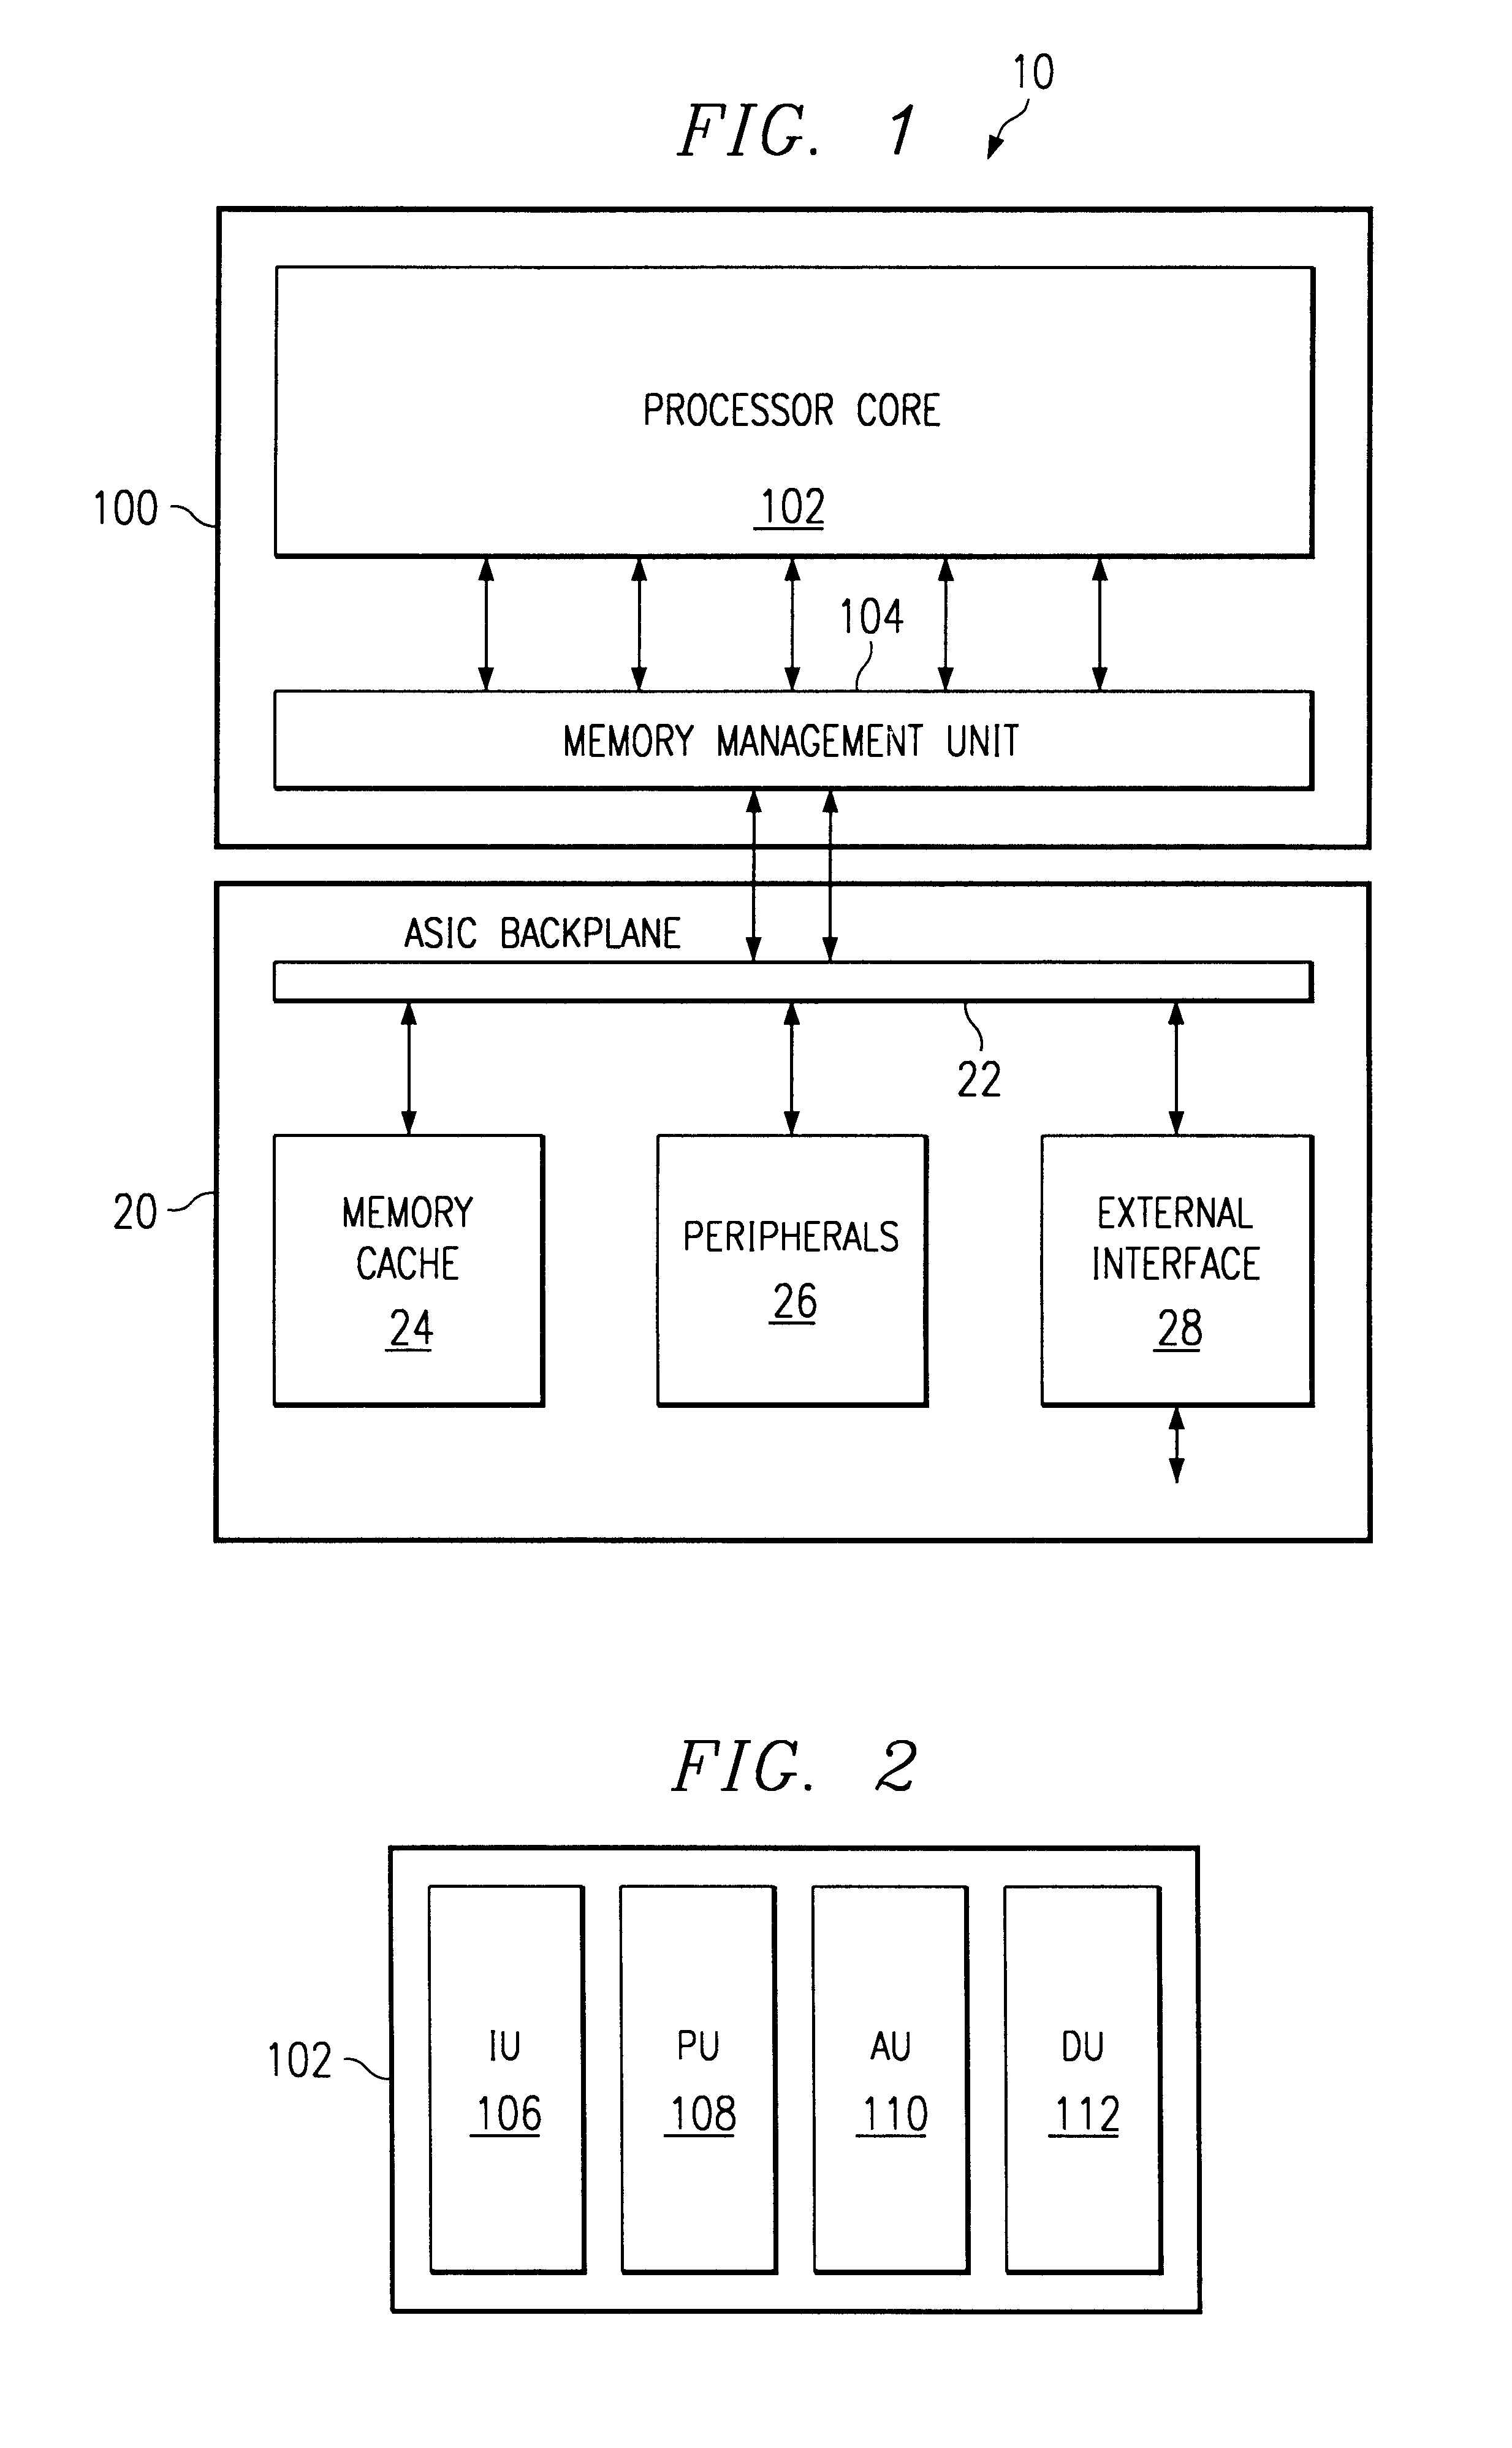 Dual access instruction and compound memory access instruction with compatible address fields